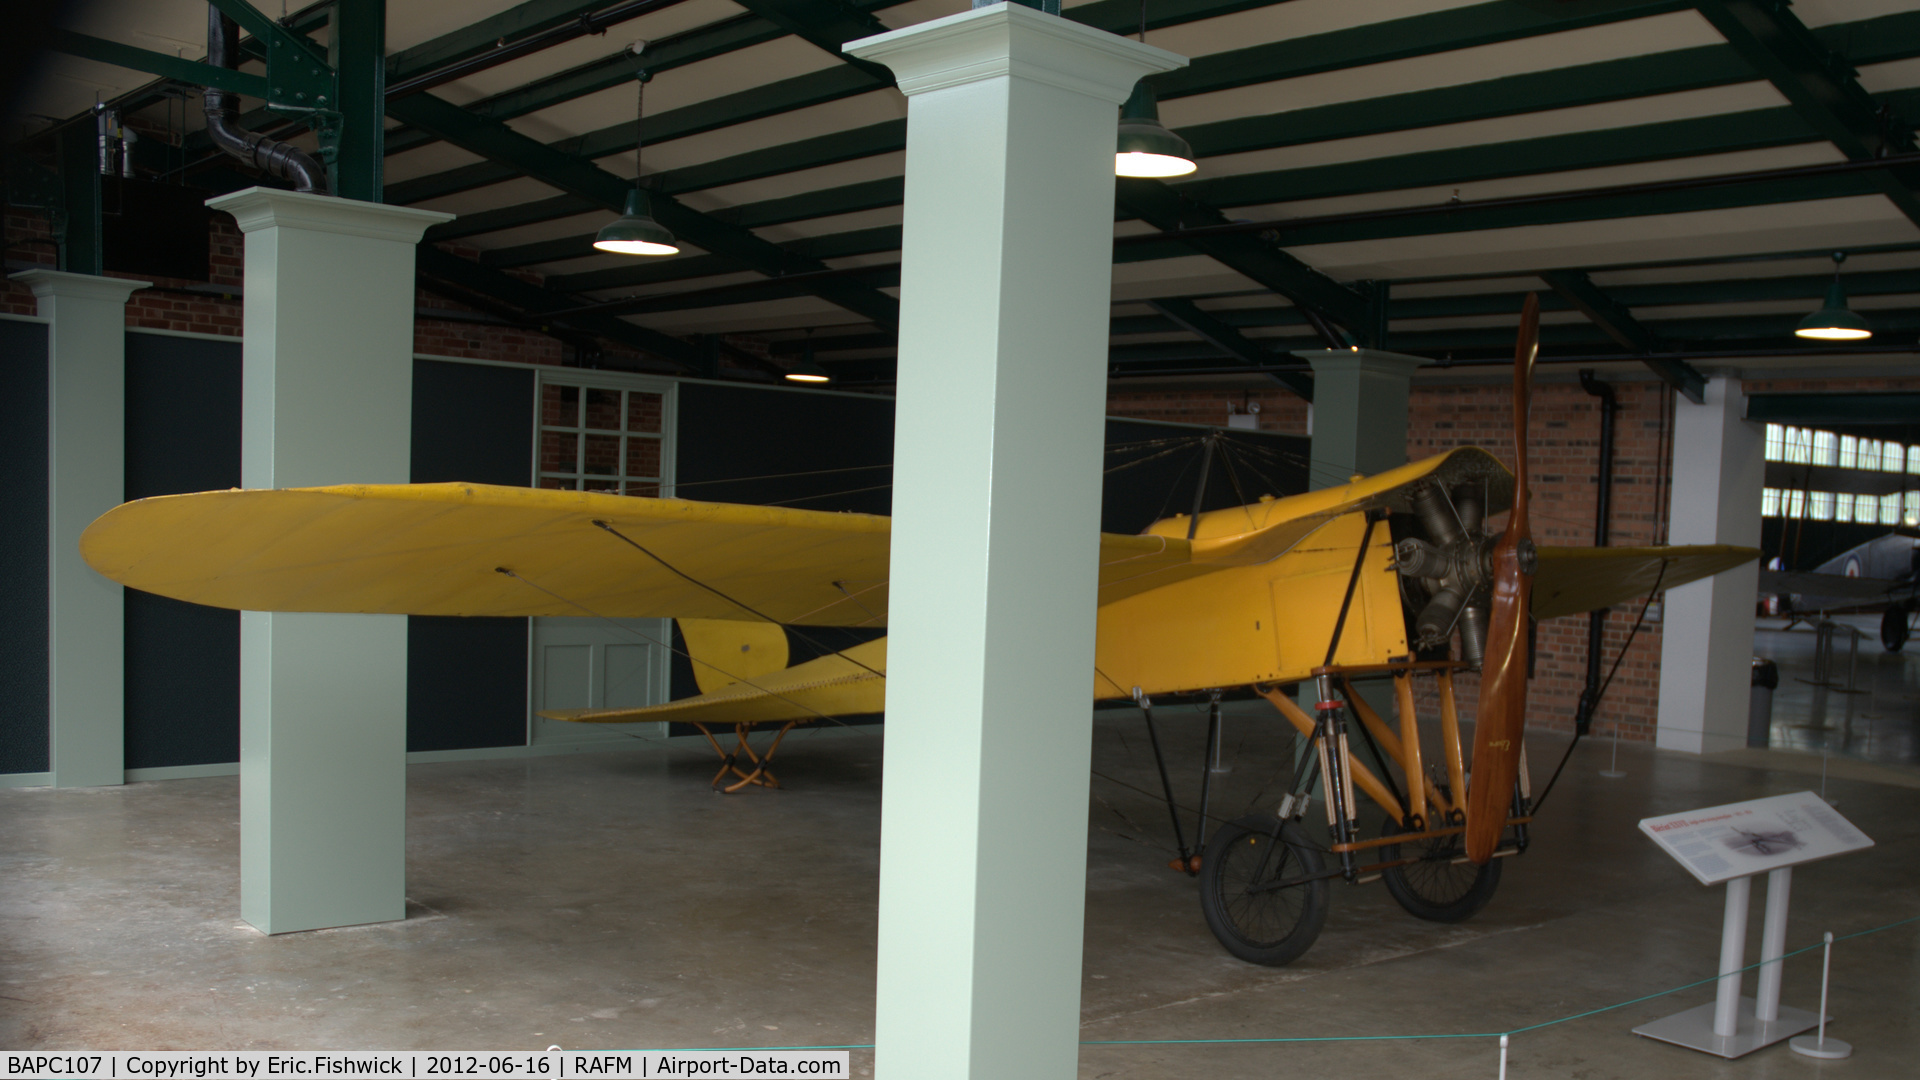 BAPC107, Bleriot XXVII C/N 433, 3. XXVII now in the new Grahame-White Factory Building at RAF Museum, Hendon.